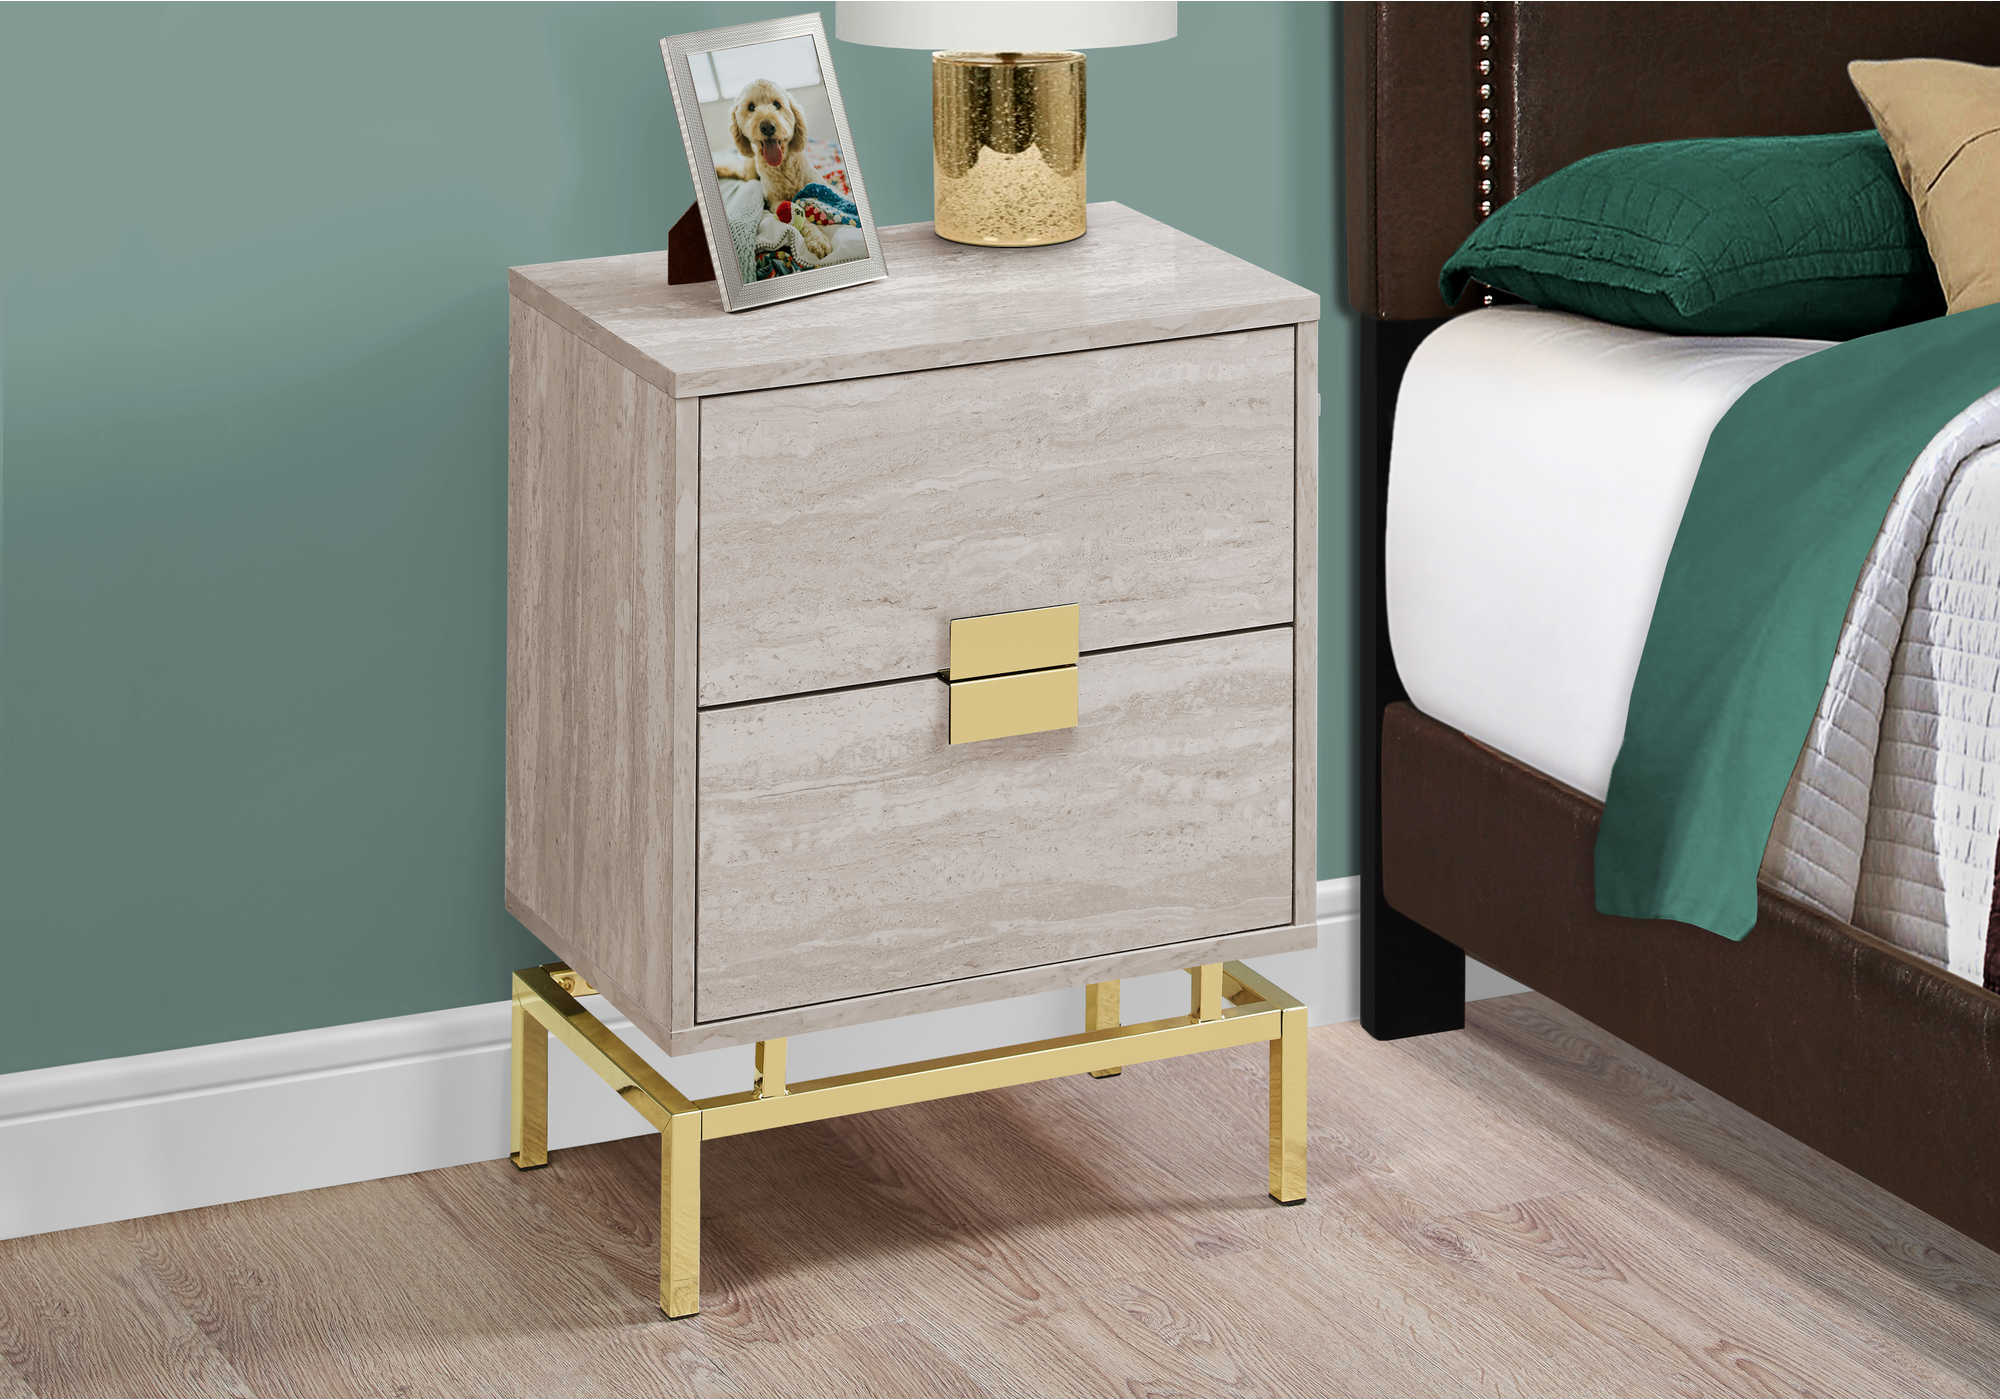 NIGHT STAND - 24"H / BEIGE MARBLE / GOLD METAL